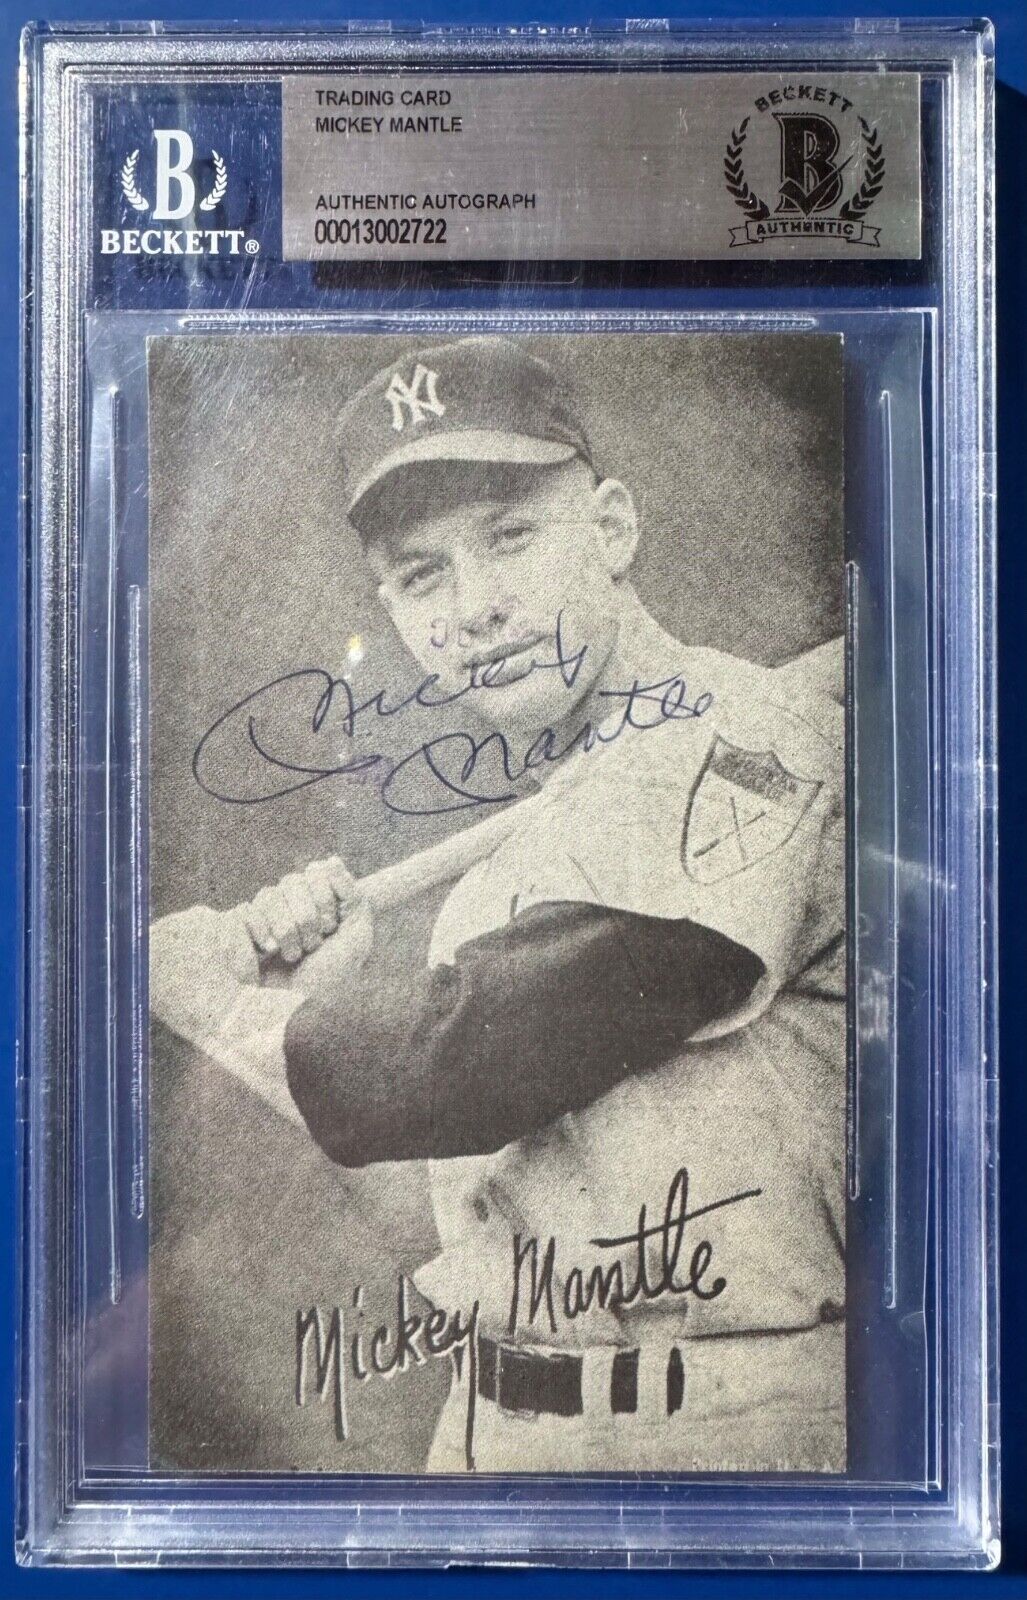 MICKEY MANTLE SIGNED EXHIBIT POSTCARD BECKETT BAS AUTHENTICATION YANKEES AUTO